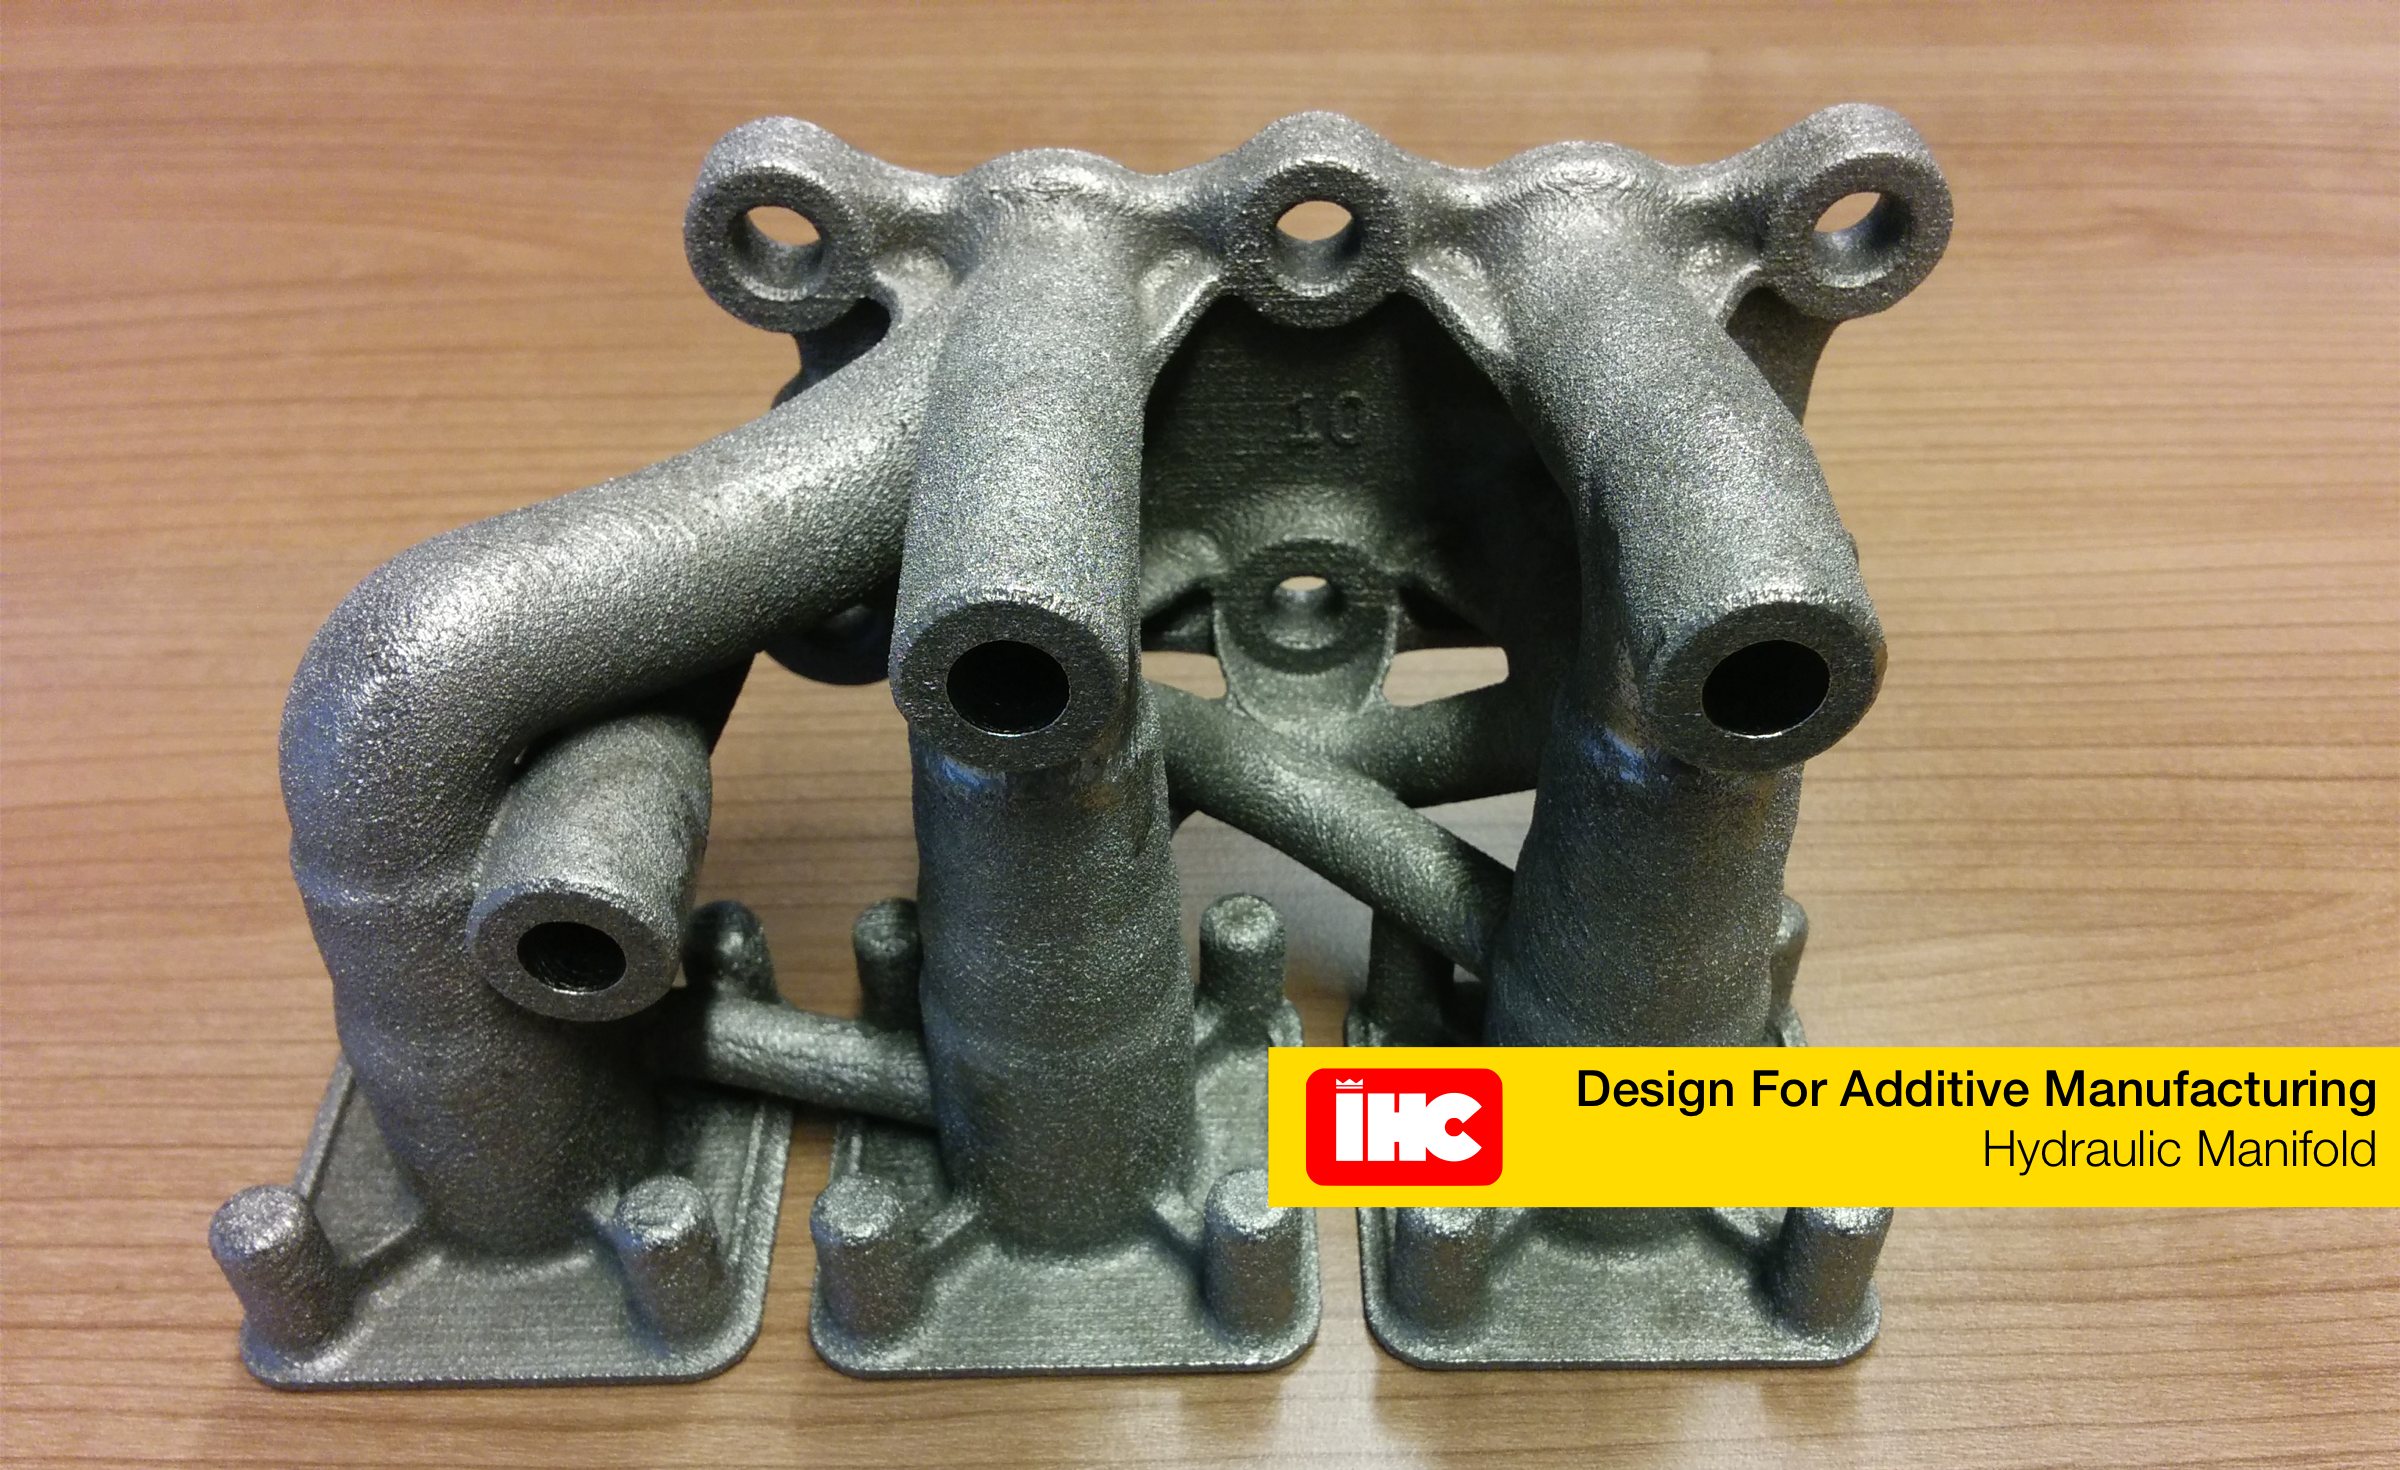 Highly optimised hydraulic manifold, manufactured by Electron Beam Melting, an additive manufacturing process - High Performance Engineering